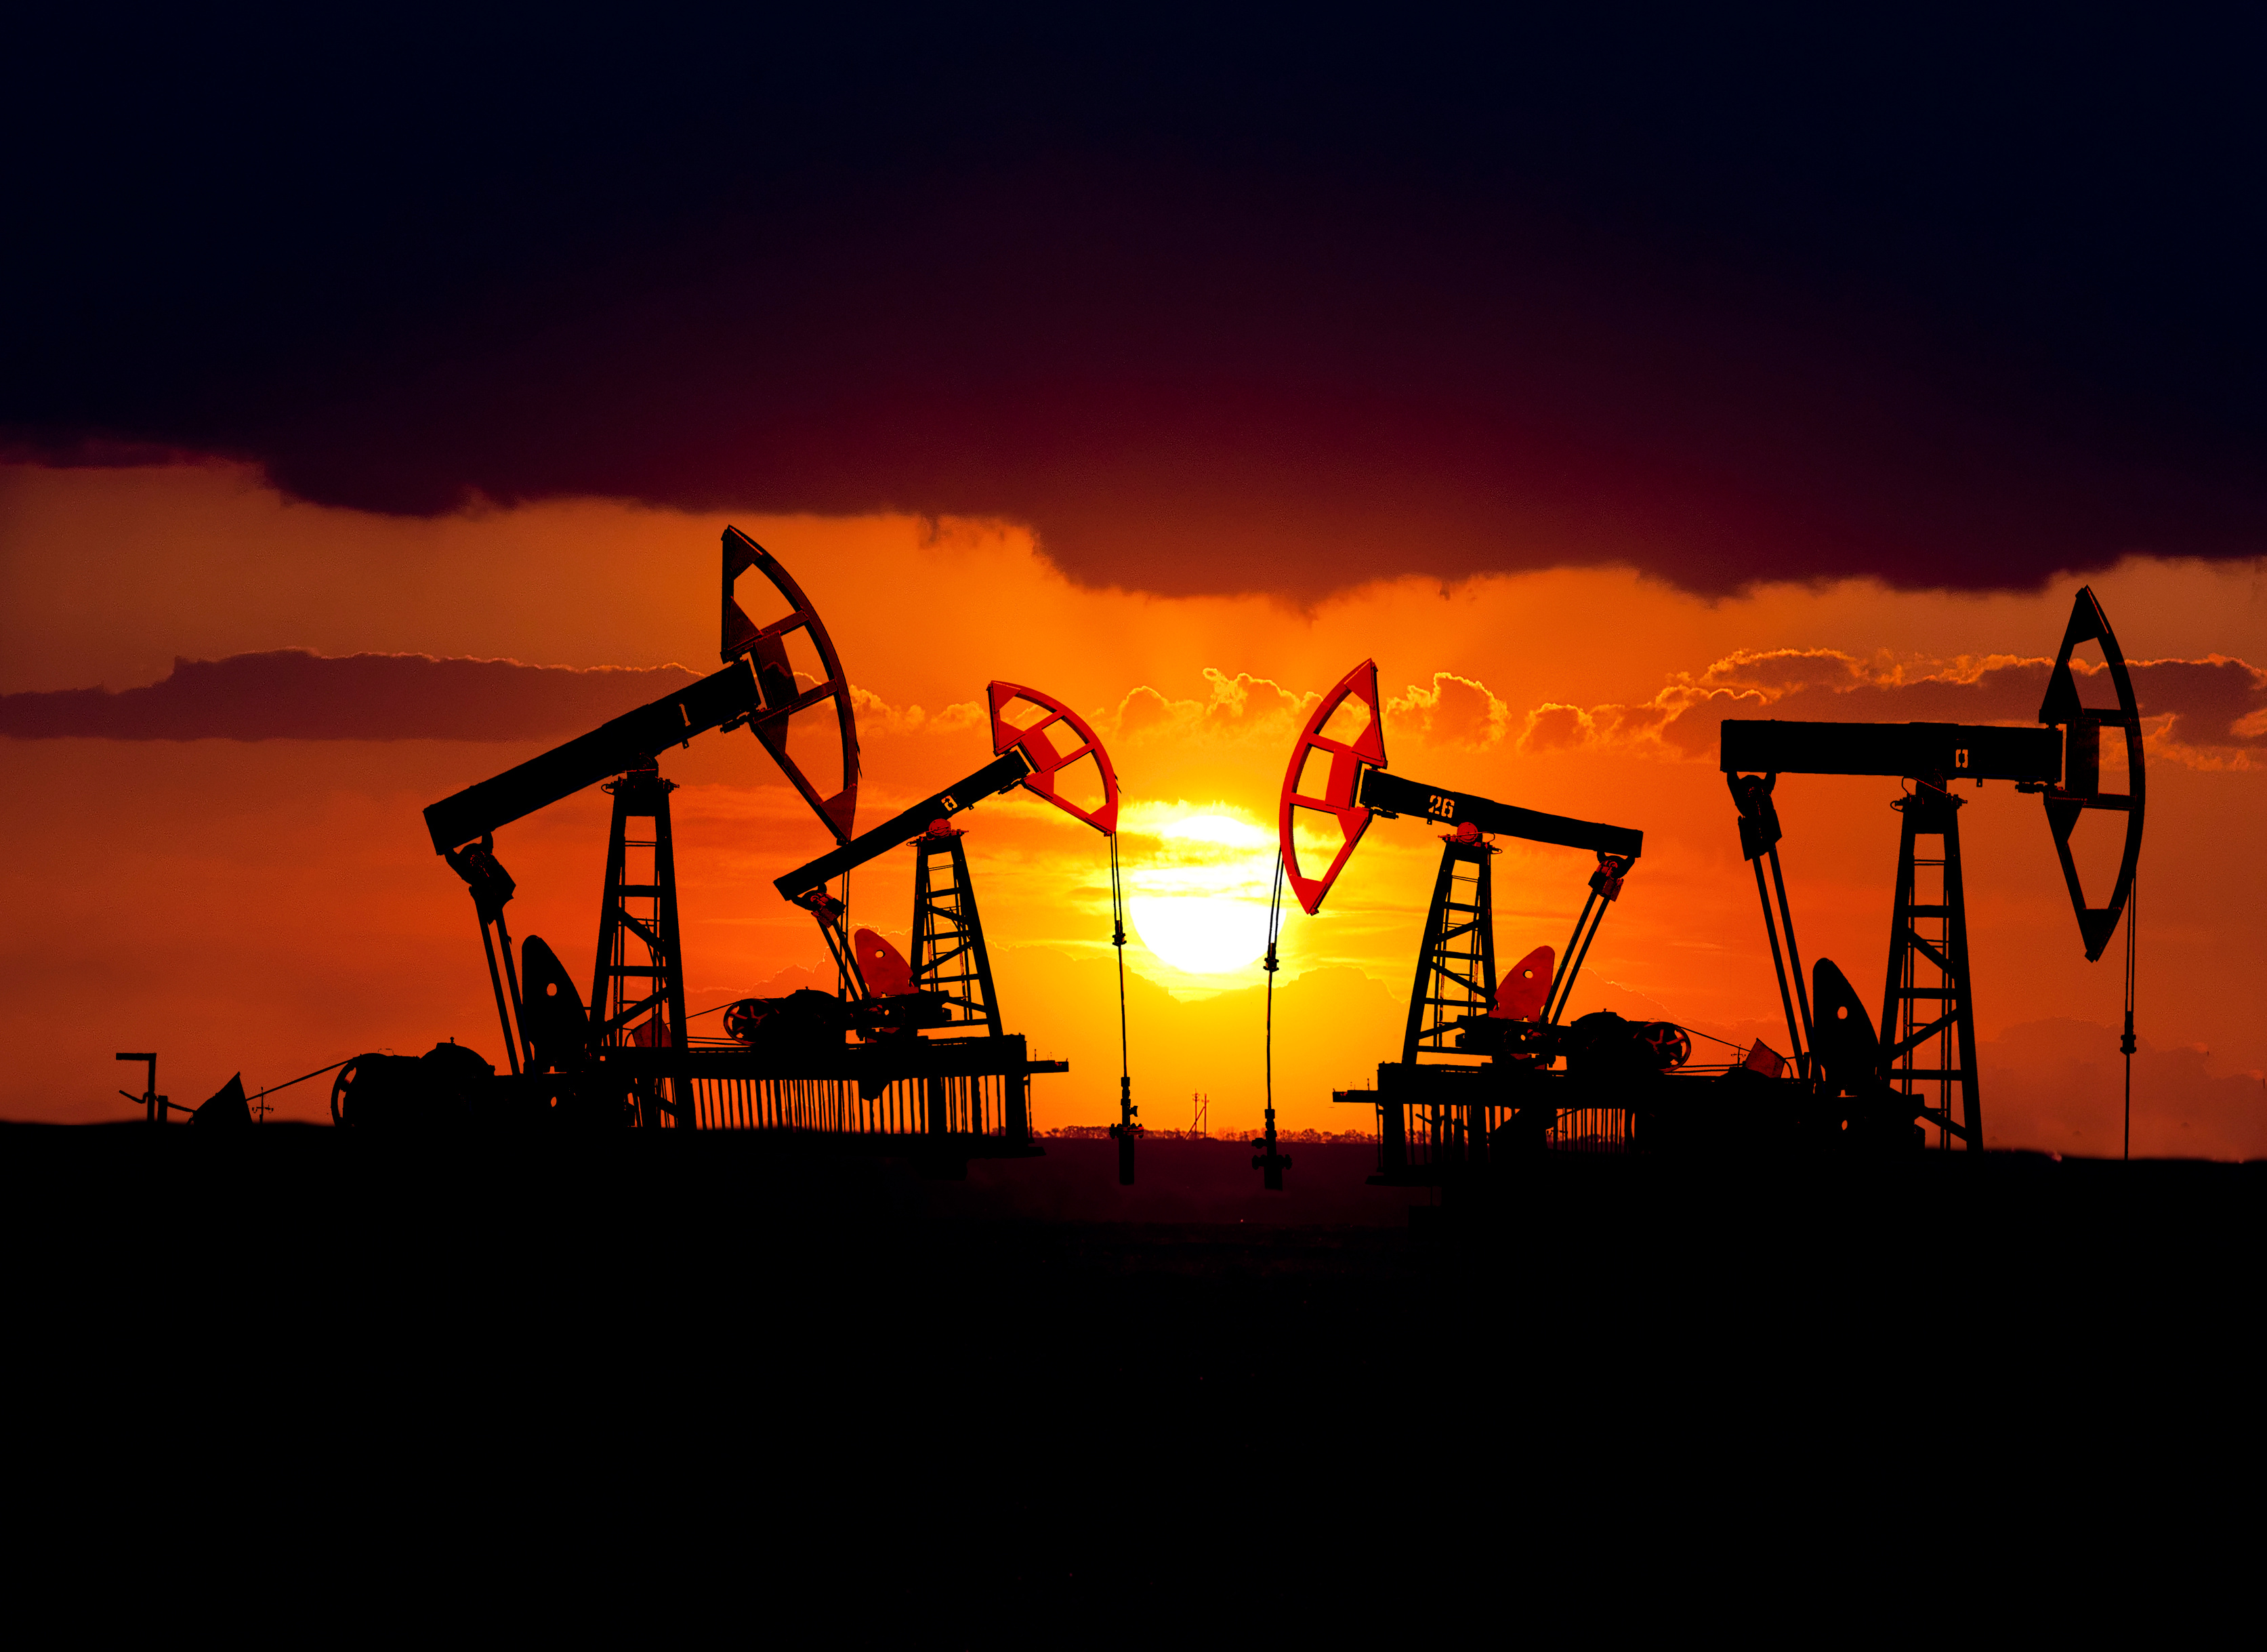 Oil rigs on oil field at sunset